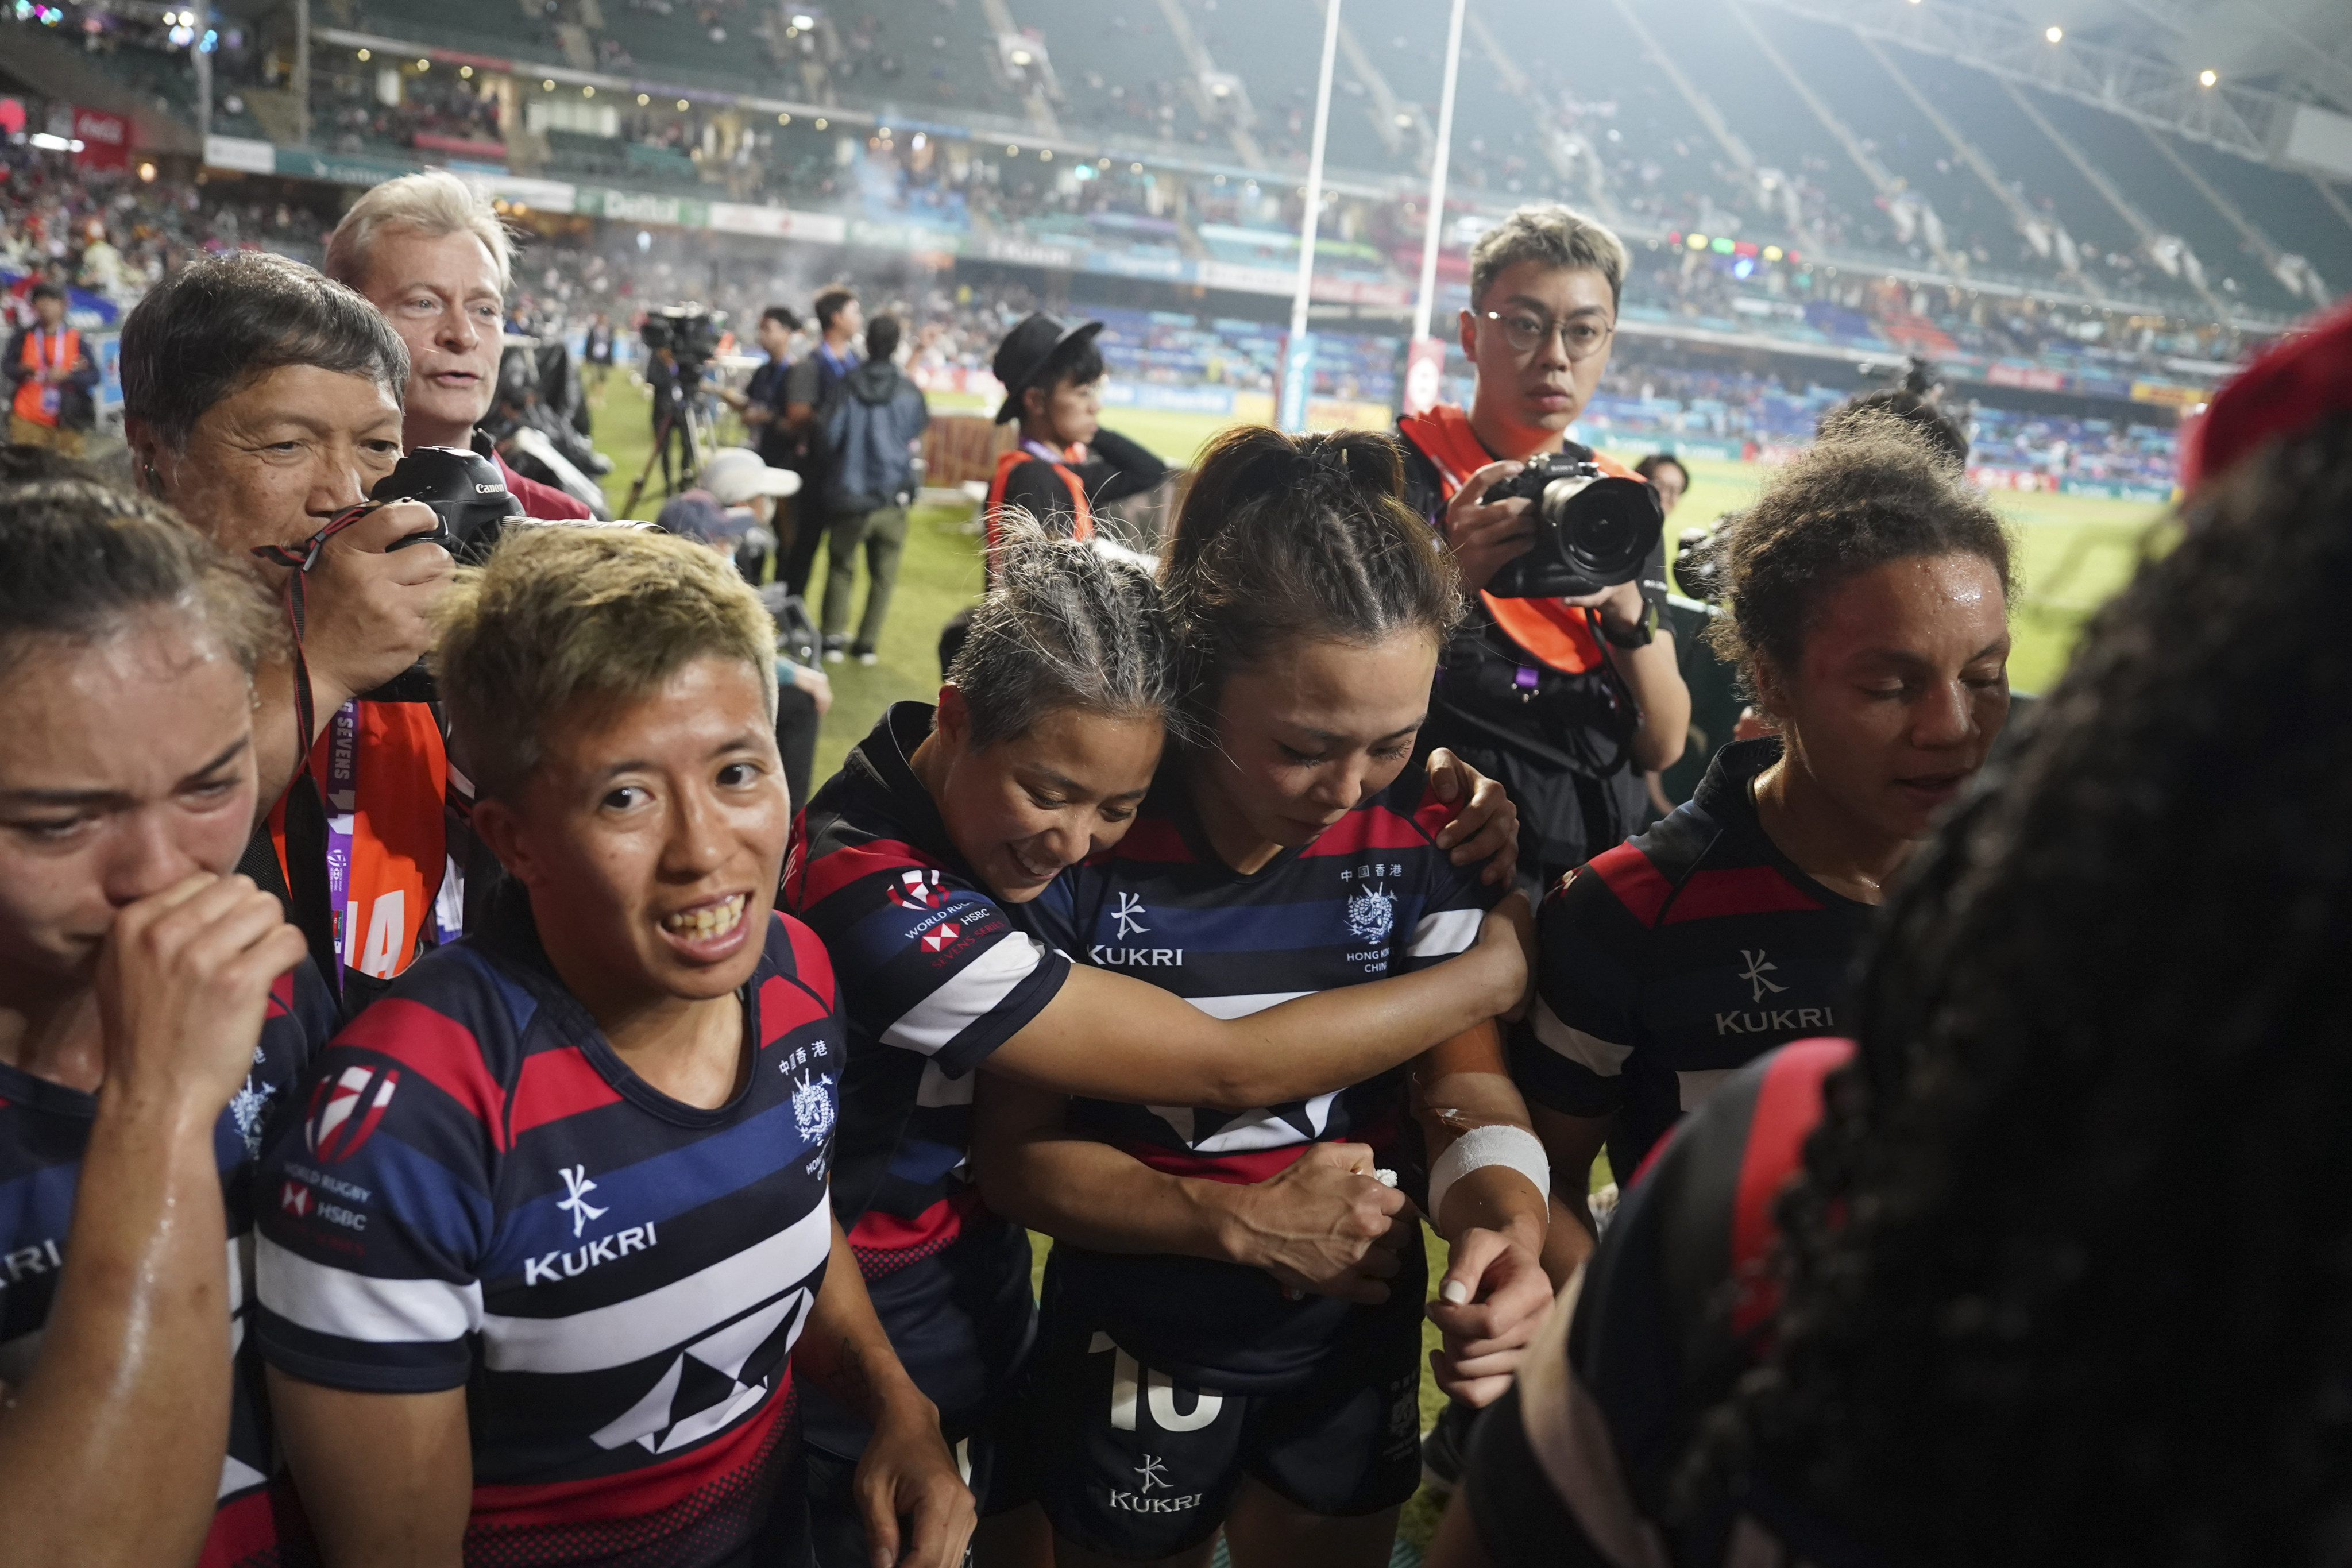 Hong Kong’s women’s team put in some gutsy displays despite results going against them. Photo: Elson Li